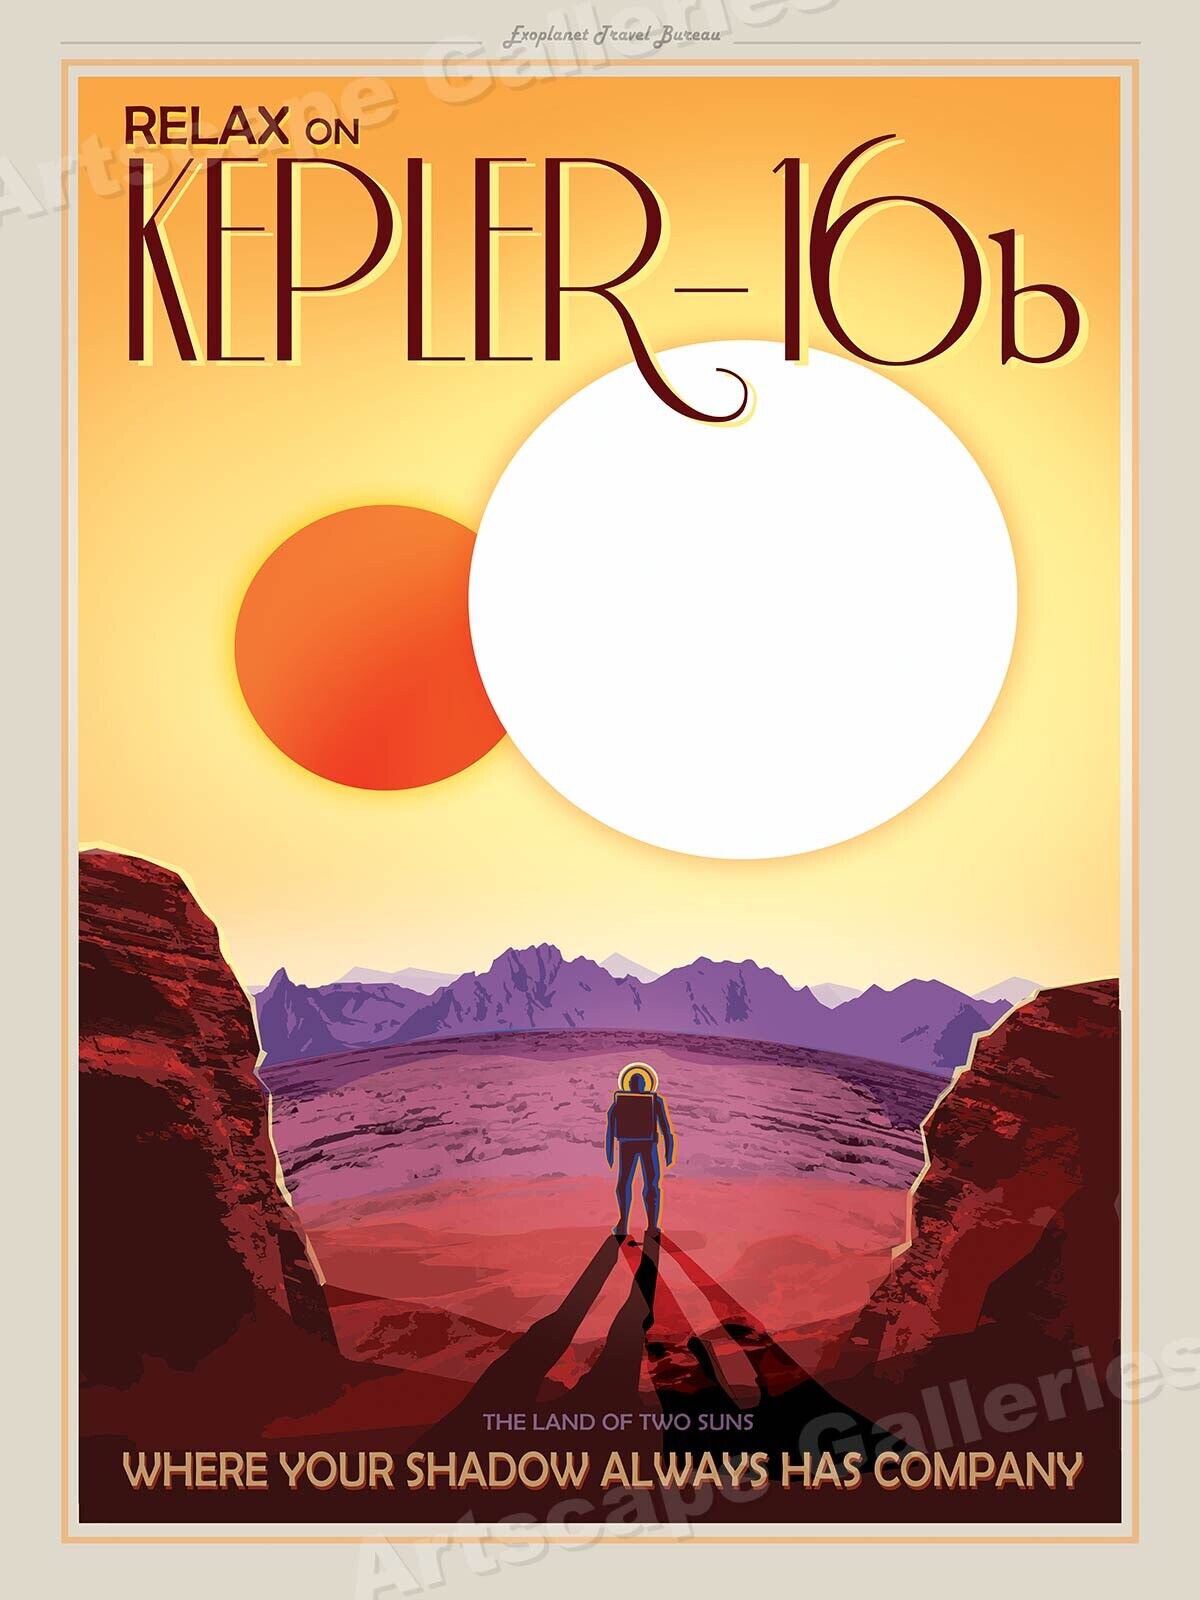 “Visit Kepler-16b” Space Exploration Retro Outer Space Travel Poster - 18x24